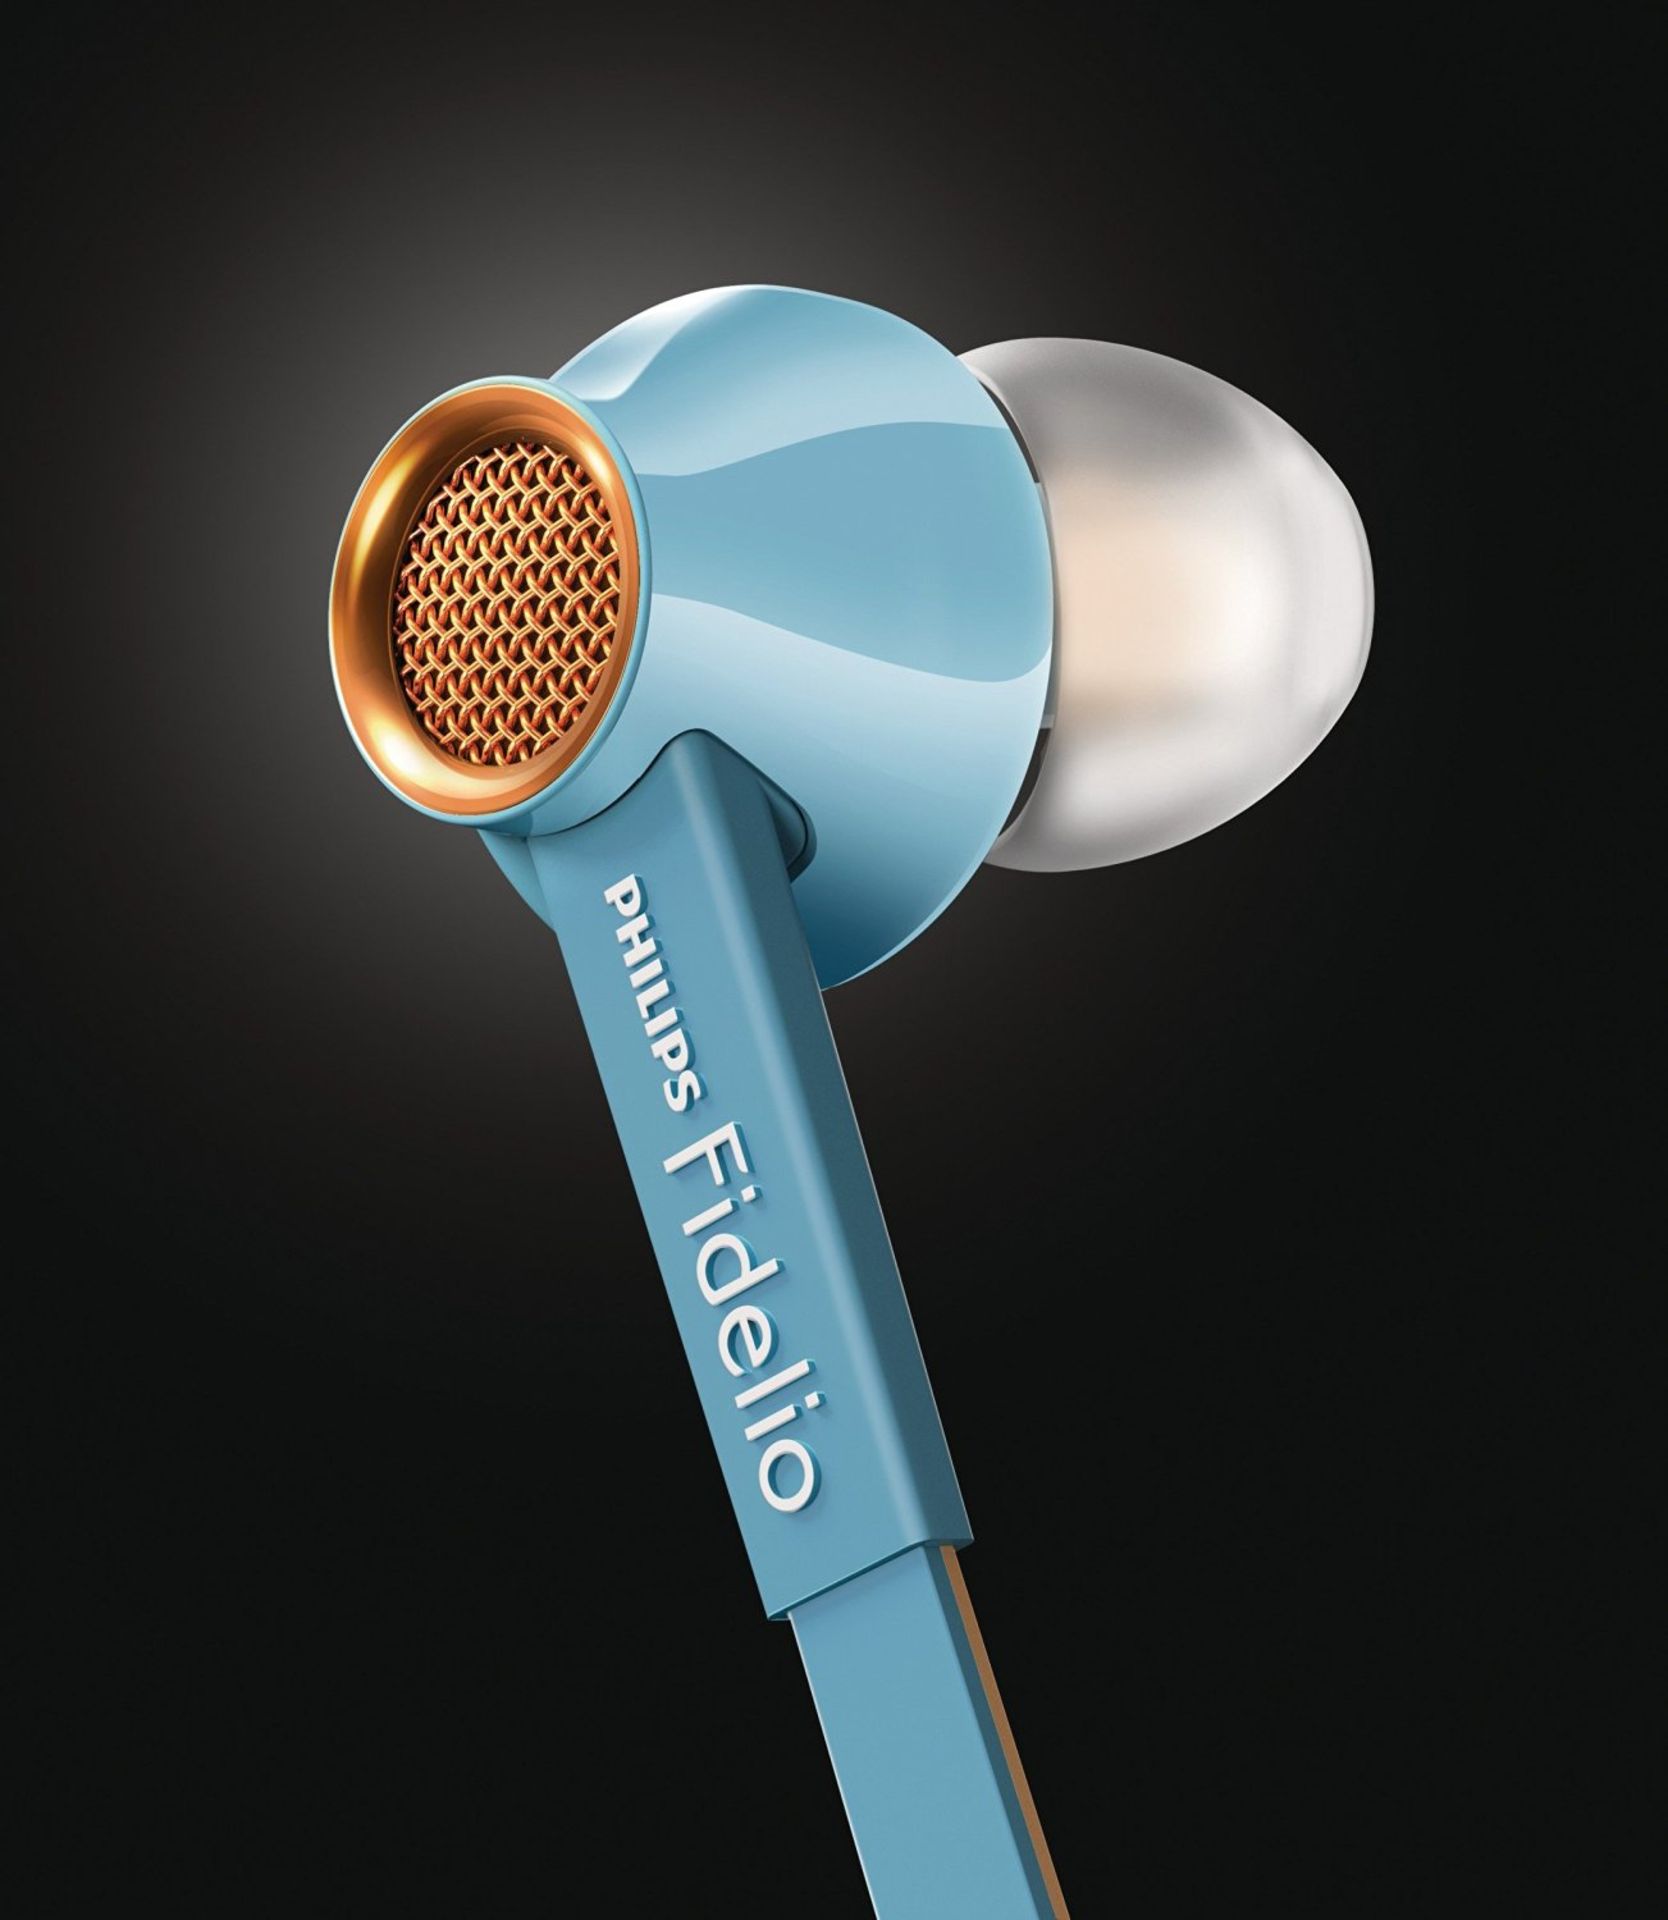 V Brand New Philips Fidelio In-Ear Headphones With Mic S2LB/00 - In Line Remote/Microphone - - Image 2 of 4